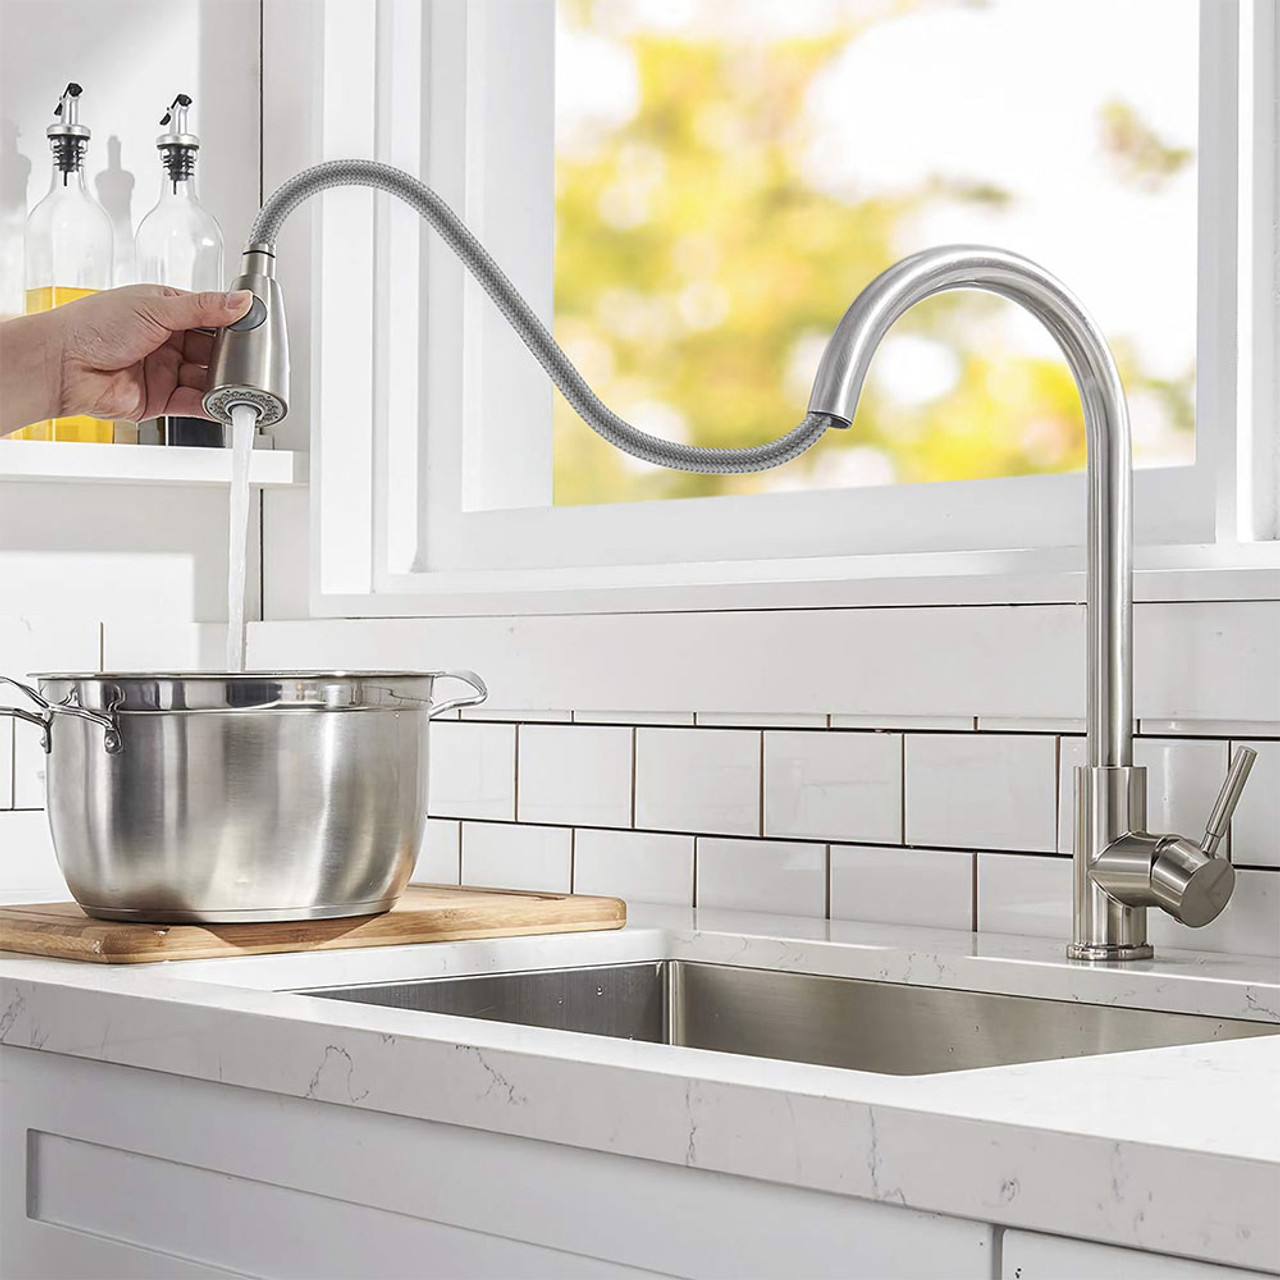 Brushed Nickel Stainless Steel Kitchen Sink Faucet with Pulldown Sprayer product image